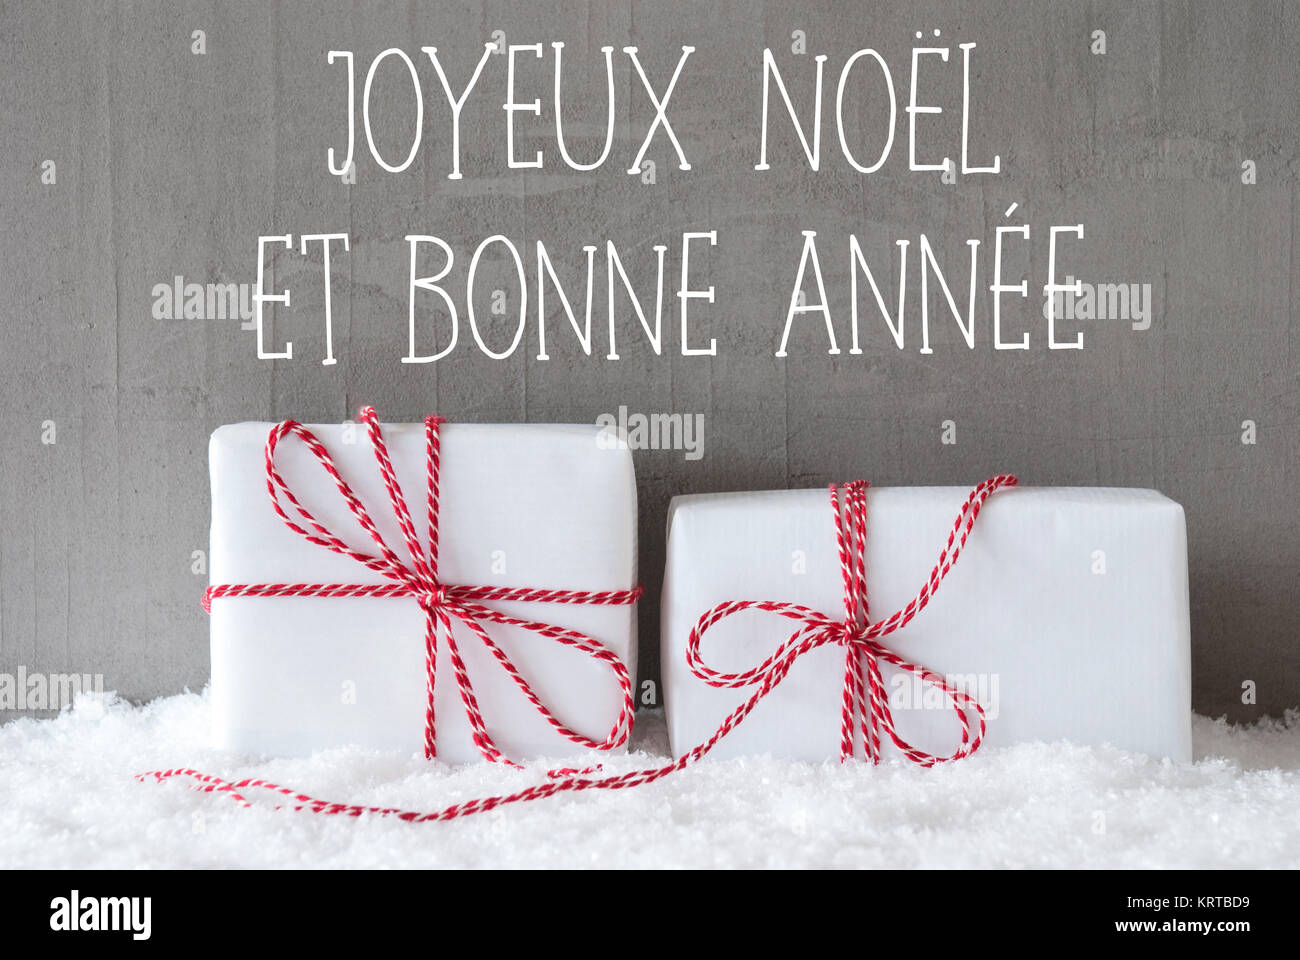 French Text Joyeux Noel Et Bonne Annee Means Merry Christmas And Happy New Year Two White Christmas Gifts Or Presents On Snow Cement Wall As Background Modern And Urban Style Stock Photo